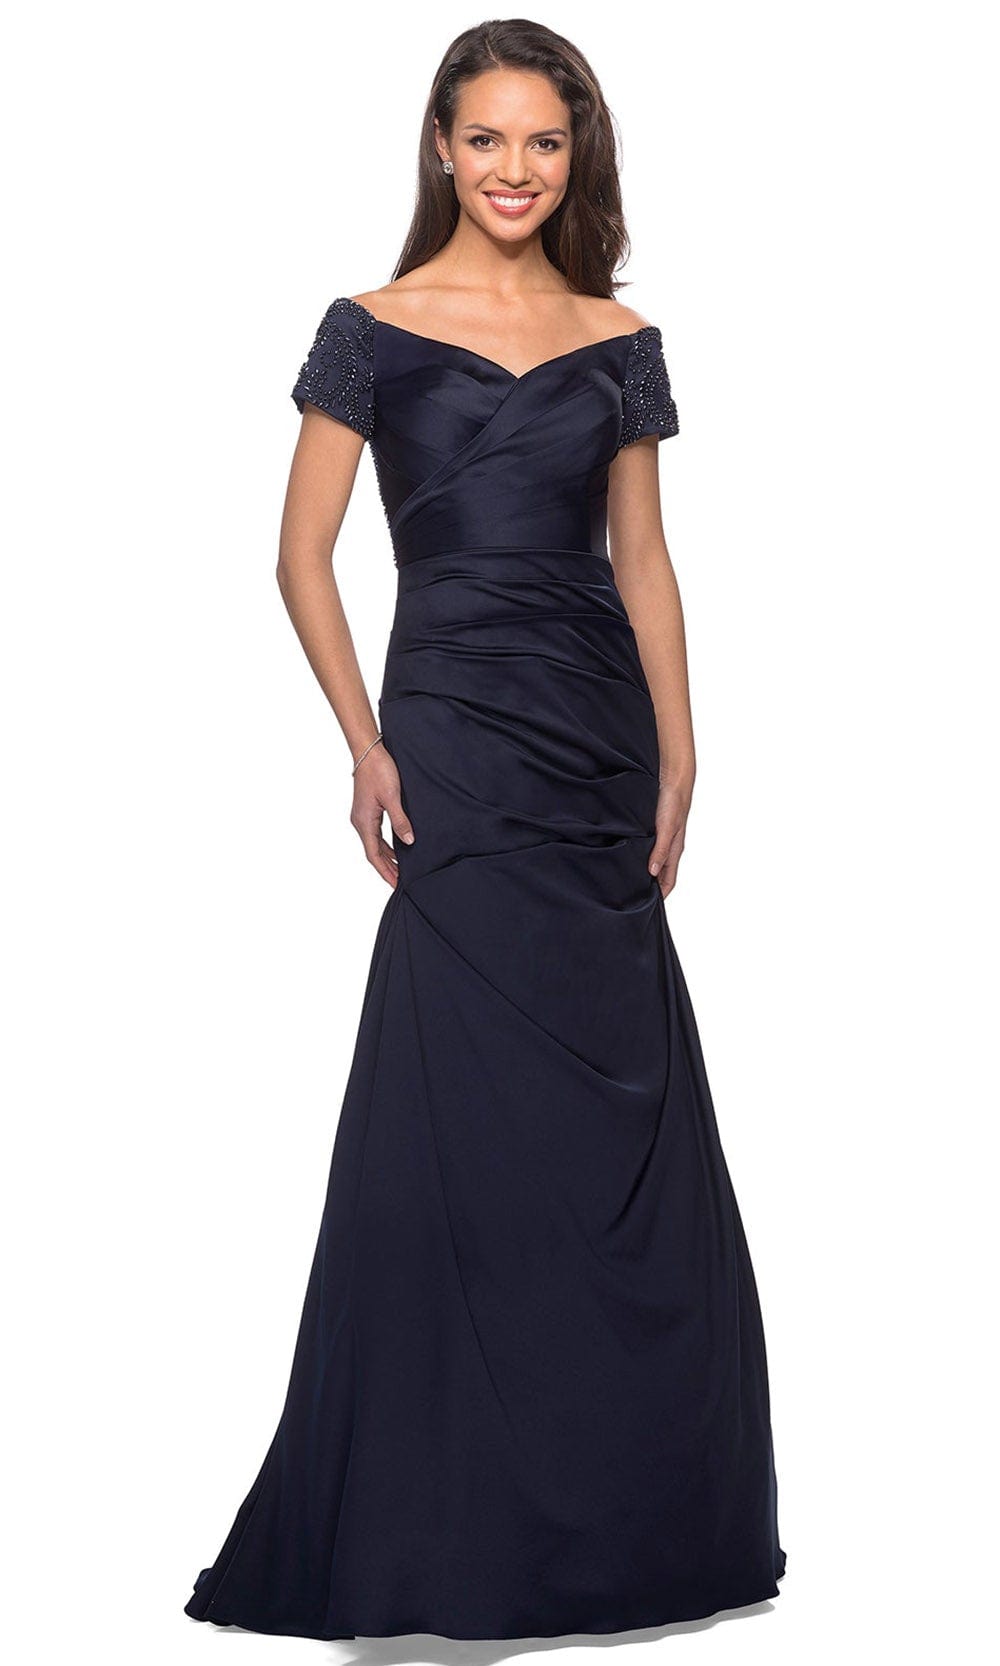 La Femme 25996 - Embellished Pleated Long Dress Special Occasion Dress 2 / Navy